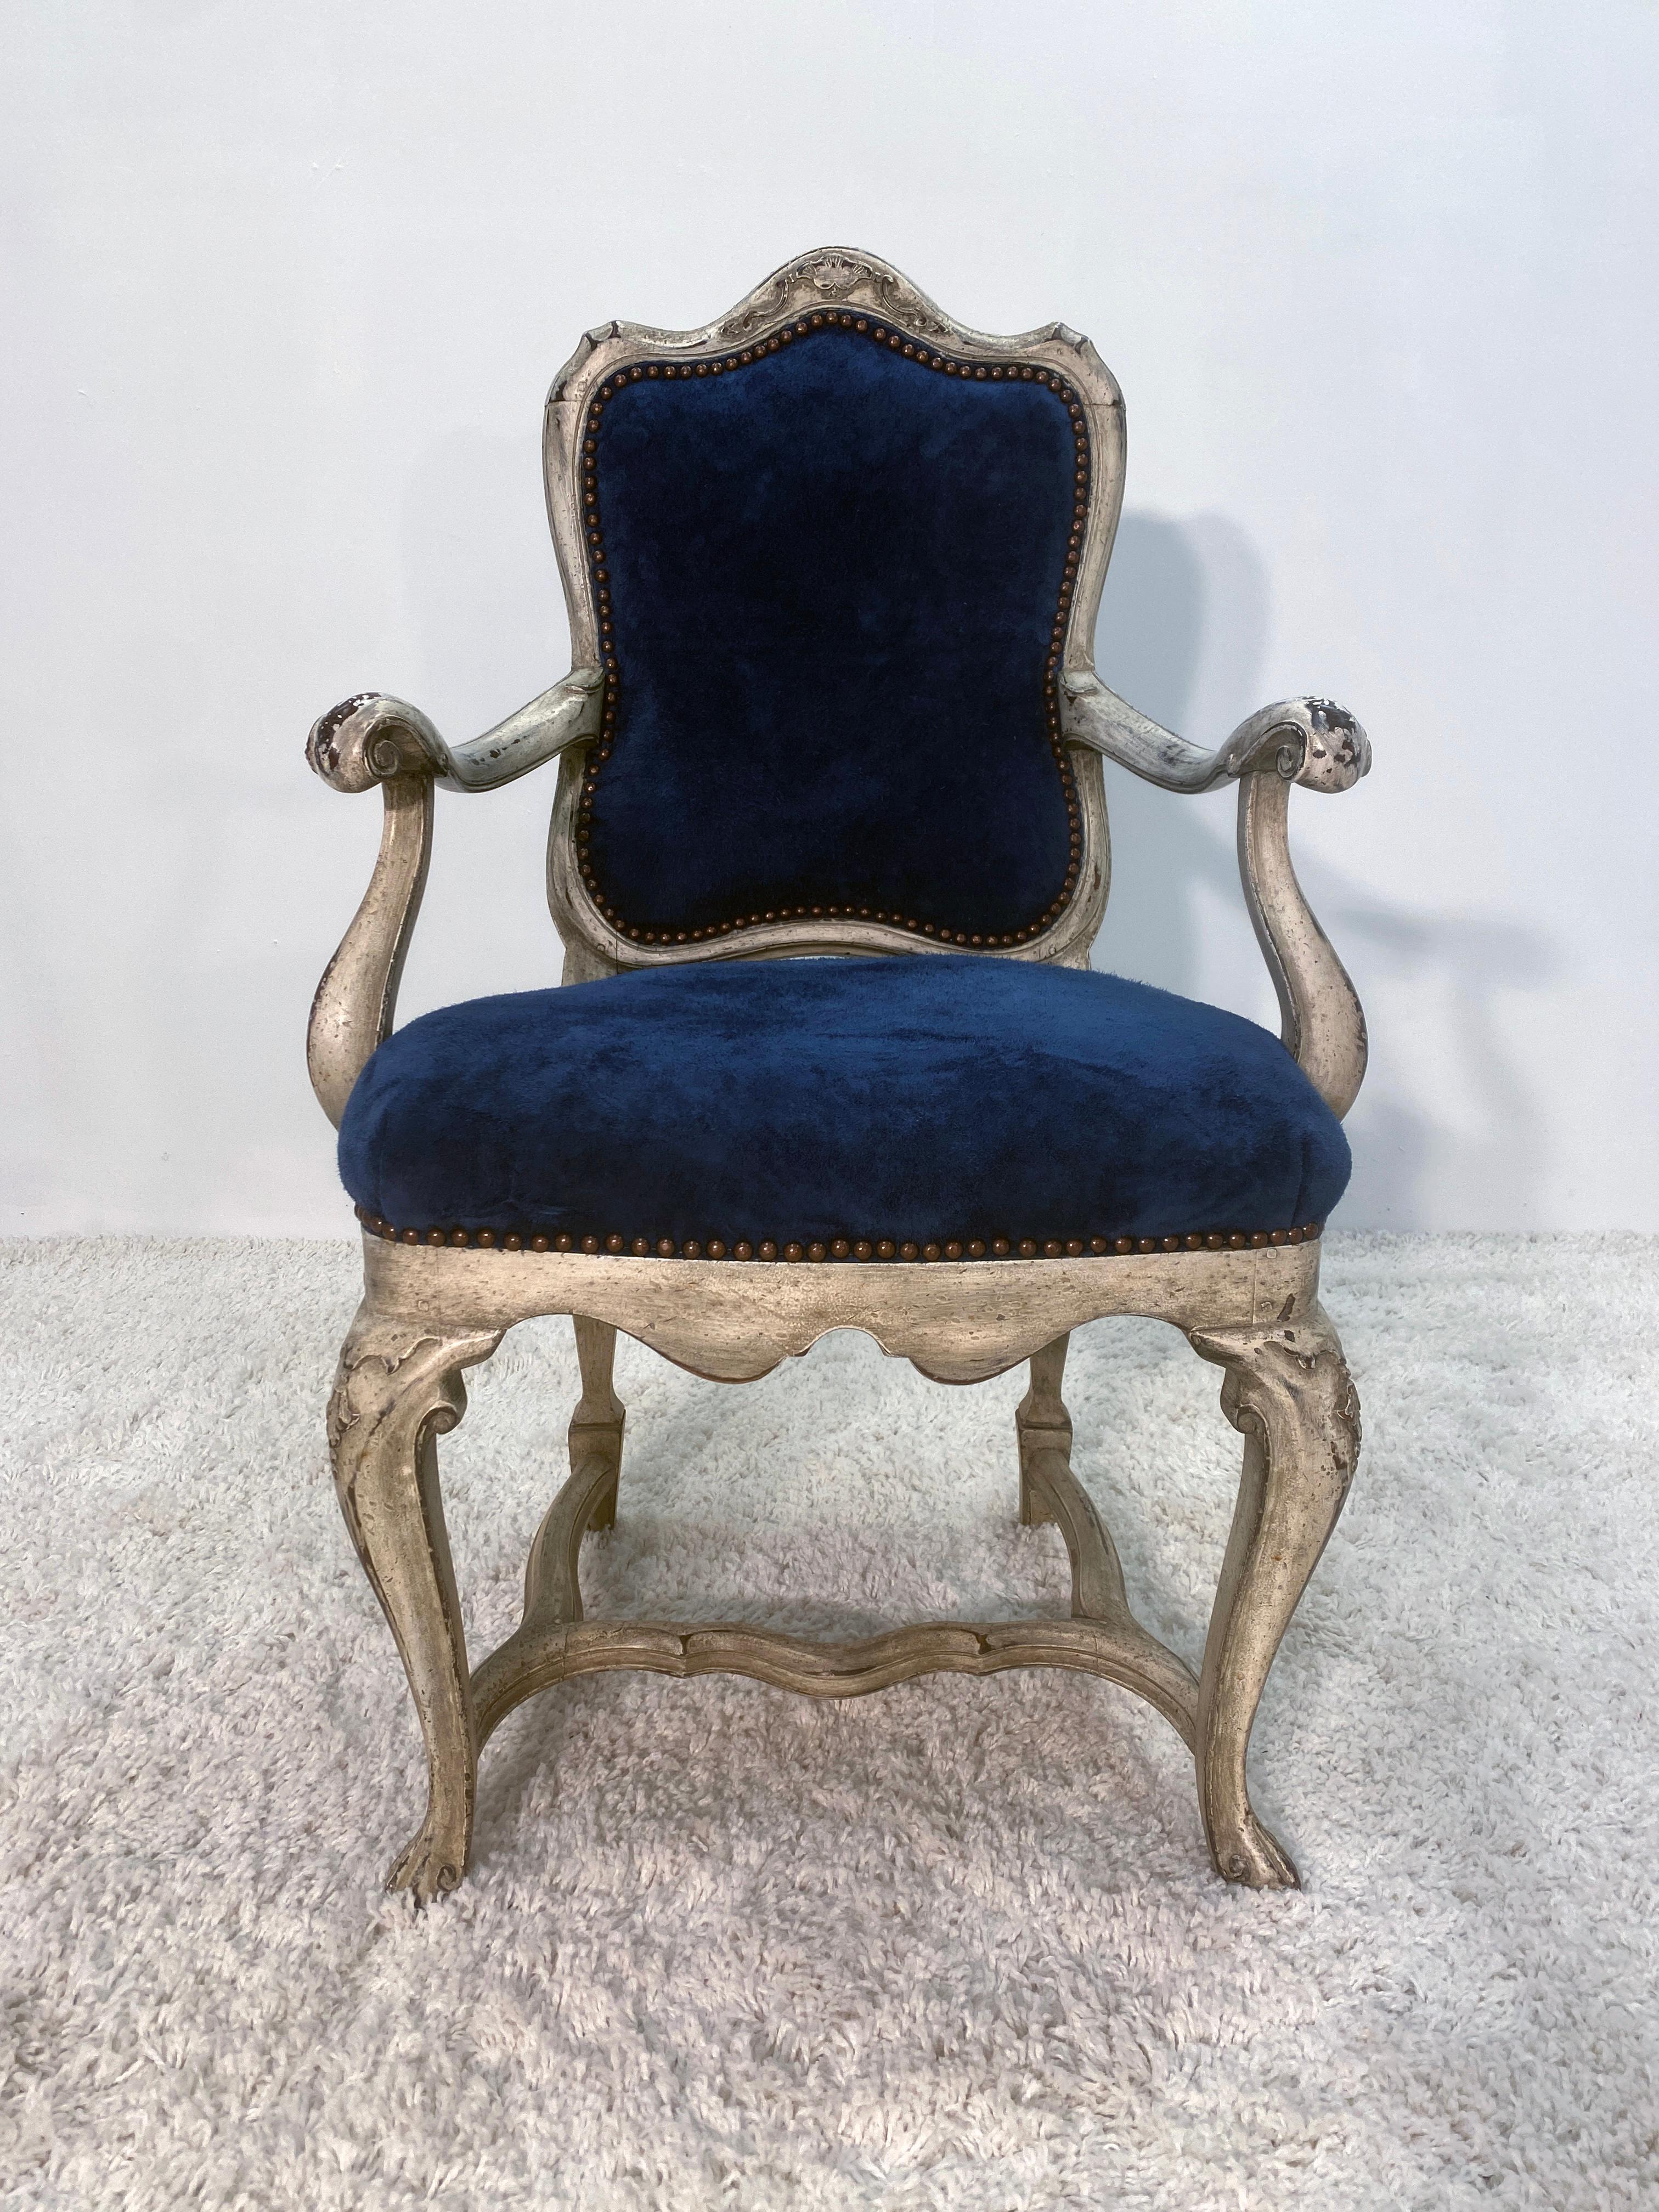 Very solid chair, this one shows good patina in the paint surface. The lacquer and glazing are warmly toned from age. No structural damage to the arms or legs. This is over all a very solid chair with no previous repair work.. We put new genuine